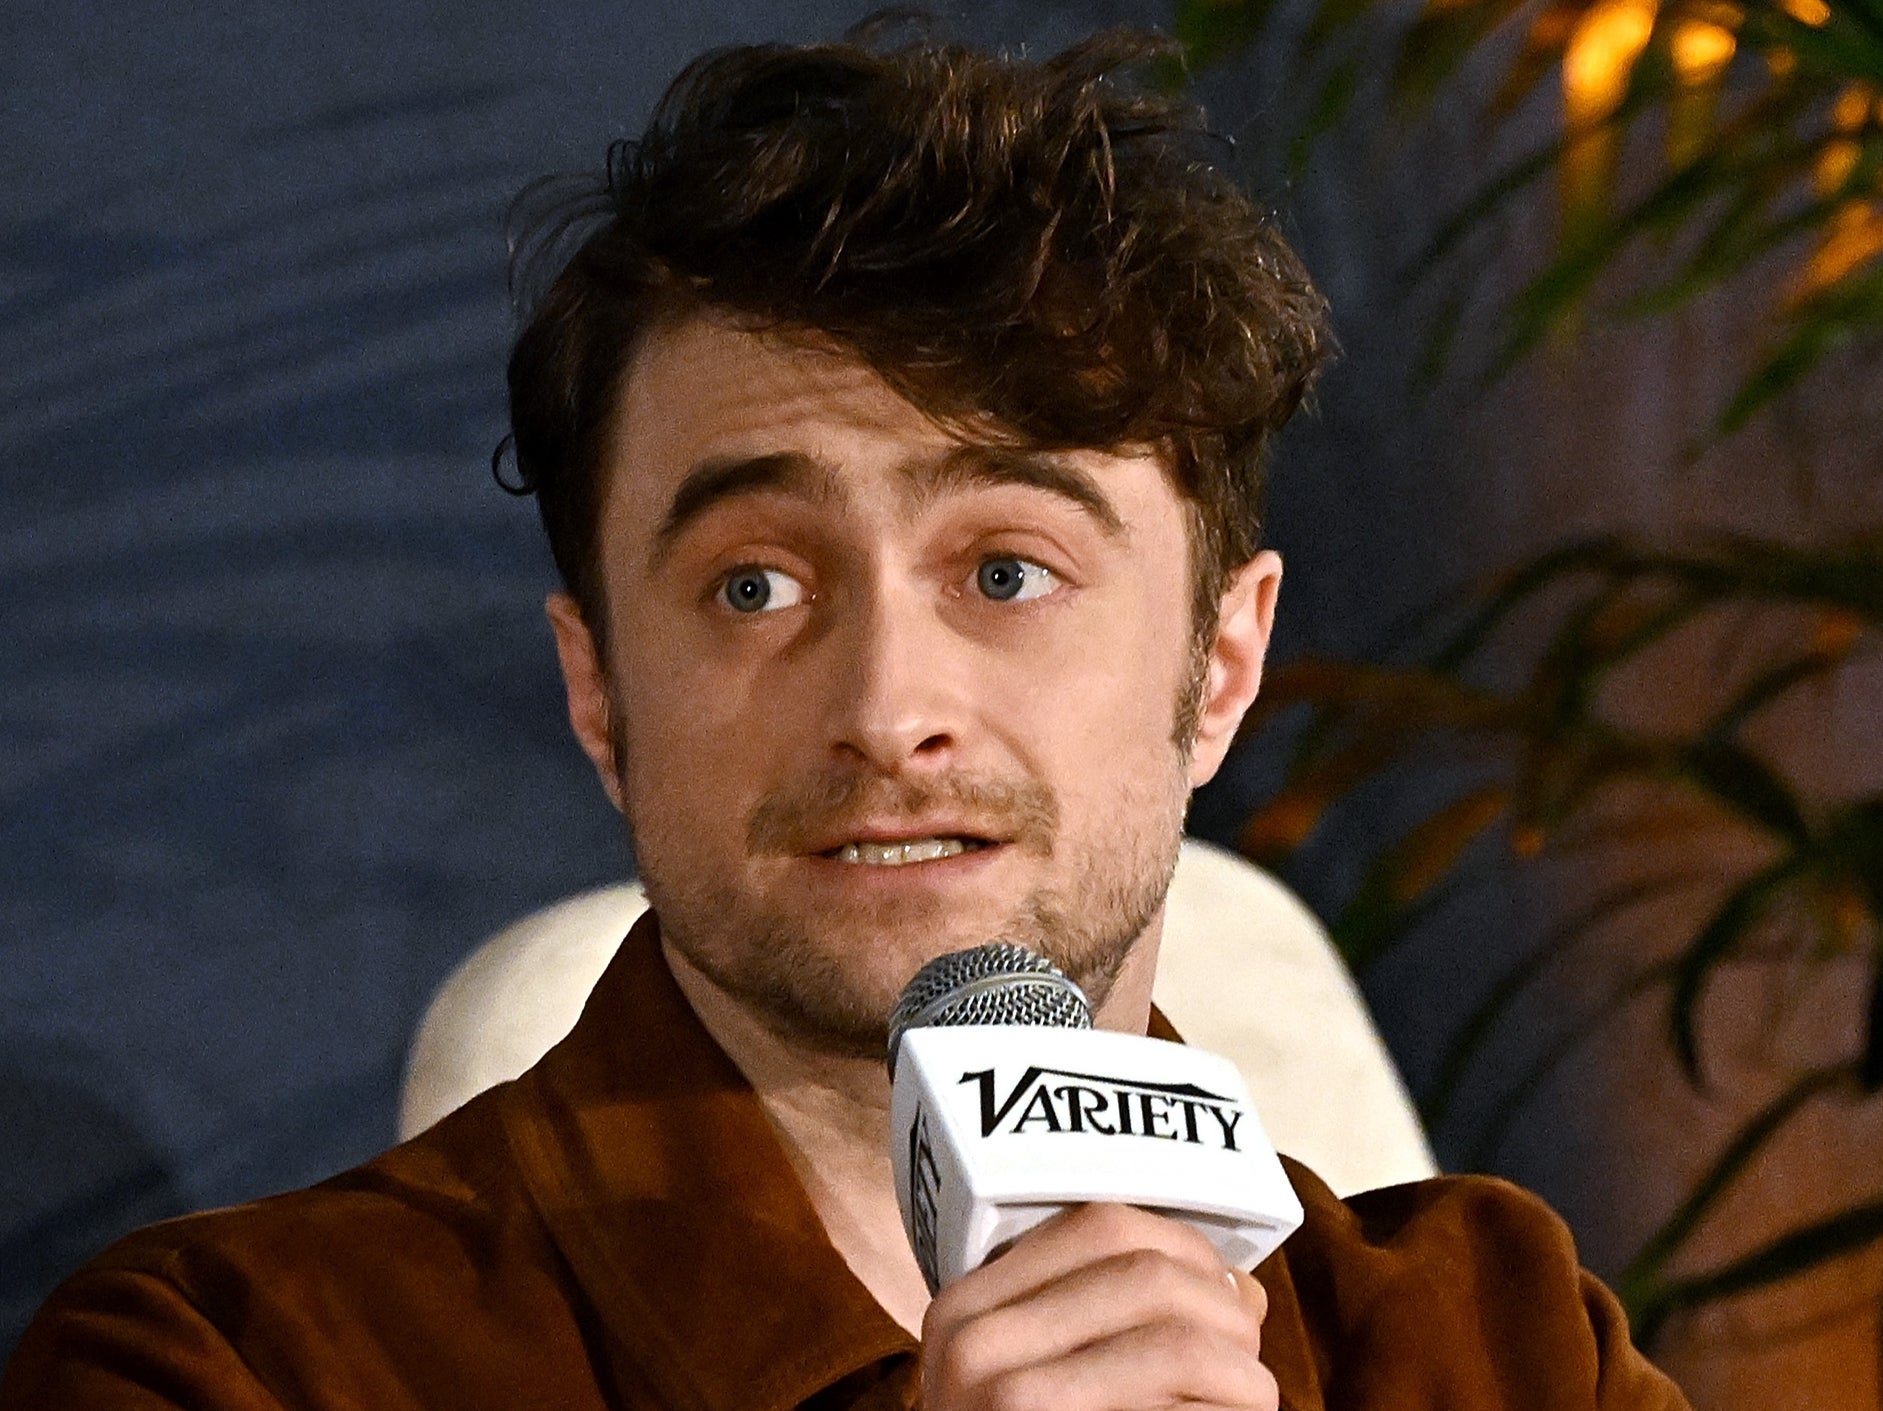 Daniel Radcliffe has remained close friends with David Holmes